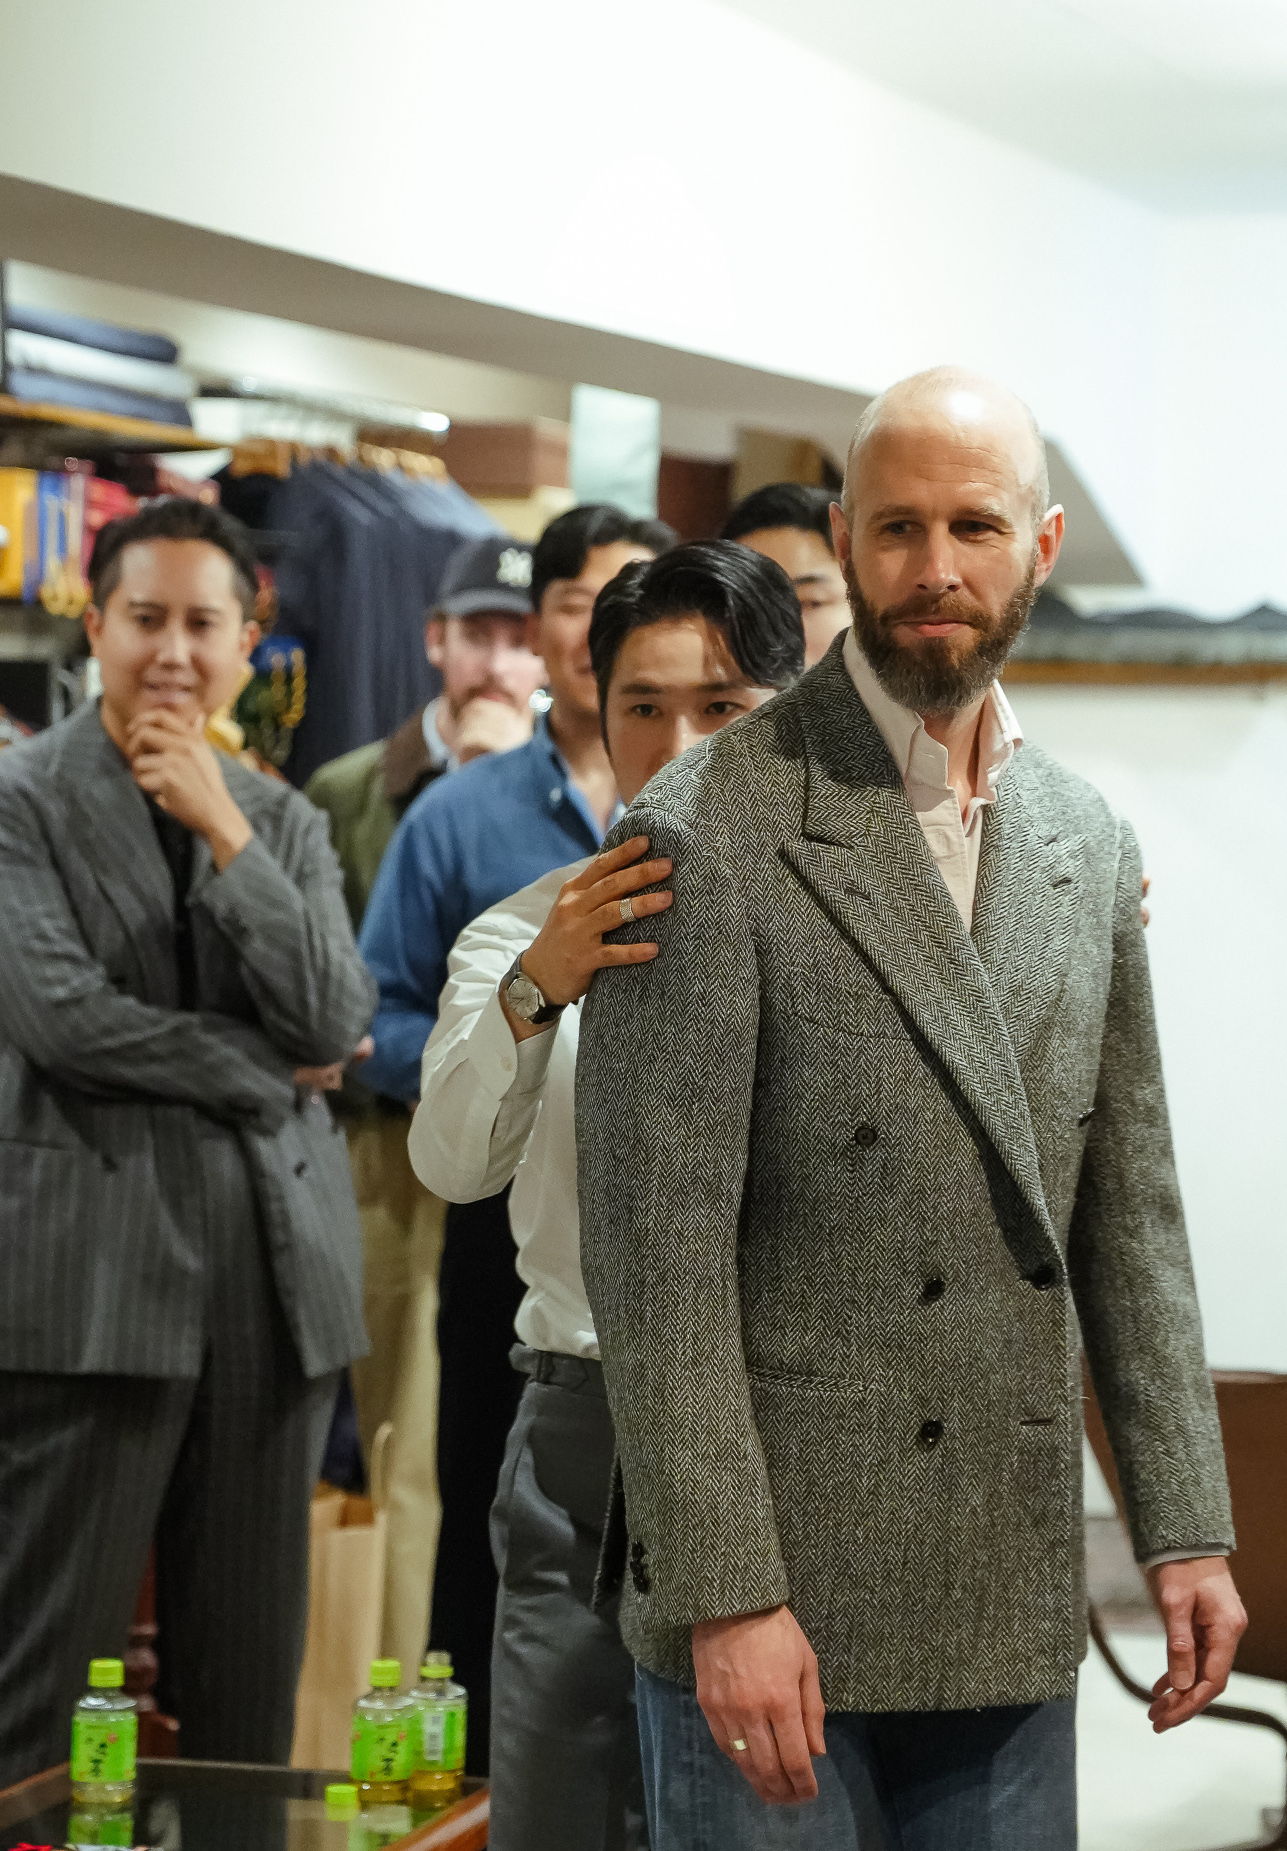 Assisi bespoke tailors, Korea: Permanent Fitting Style a tweed – DB